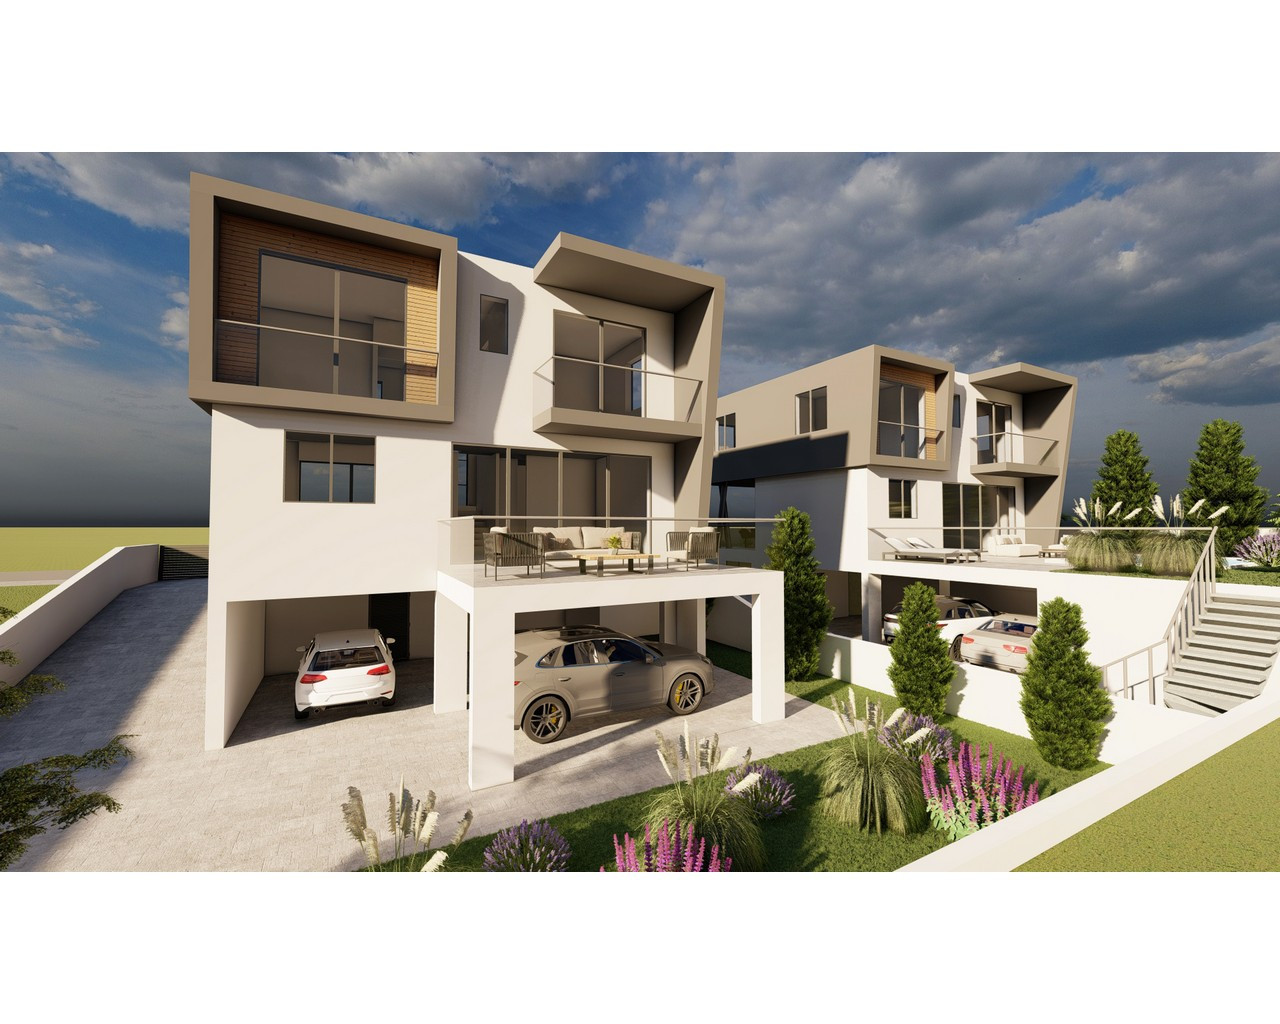 3 Bedroom House for Sale in Limassol – Mesa Geitonia